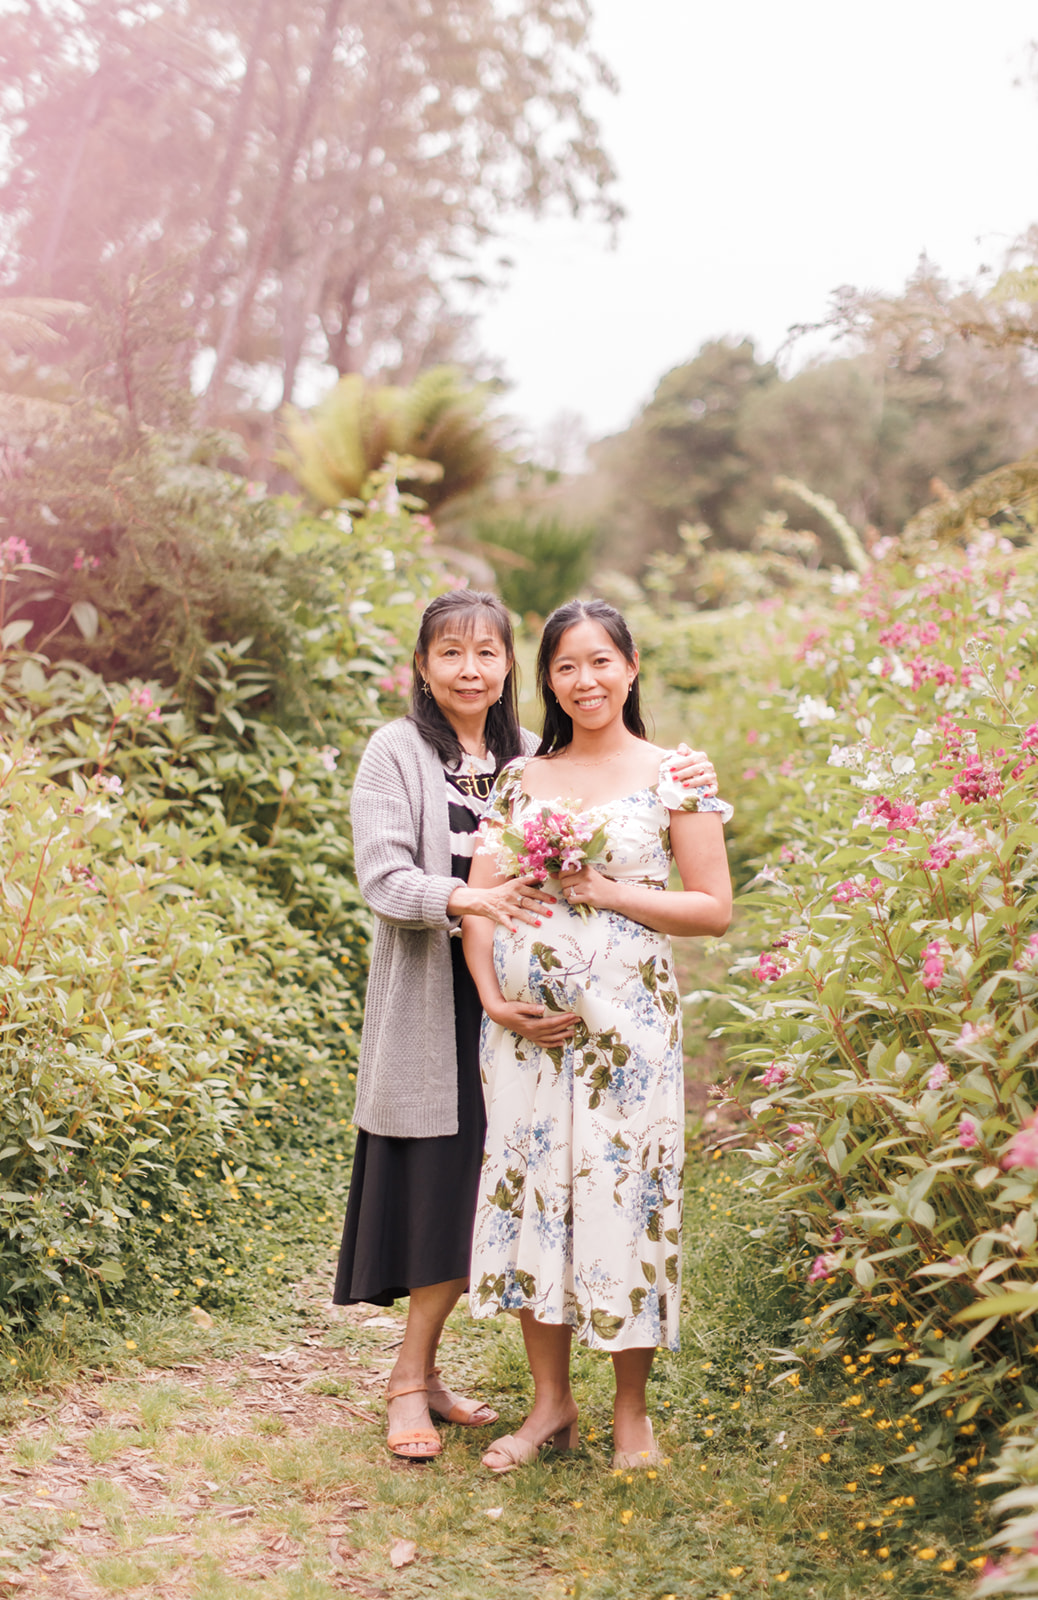 Natural maternity photo shoot, and beautiful grassy area with wildflowers inside Golden Gate Park in San Francisco